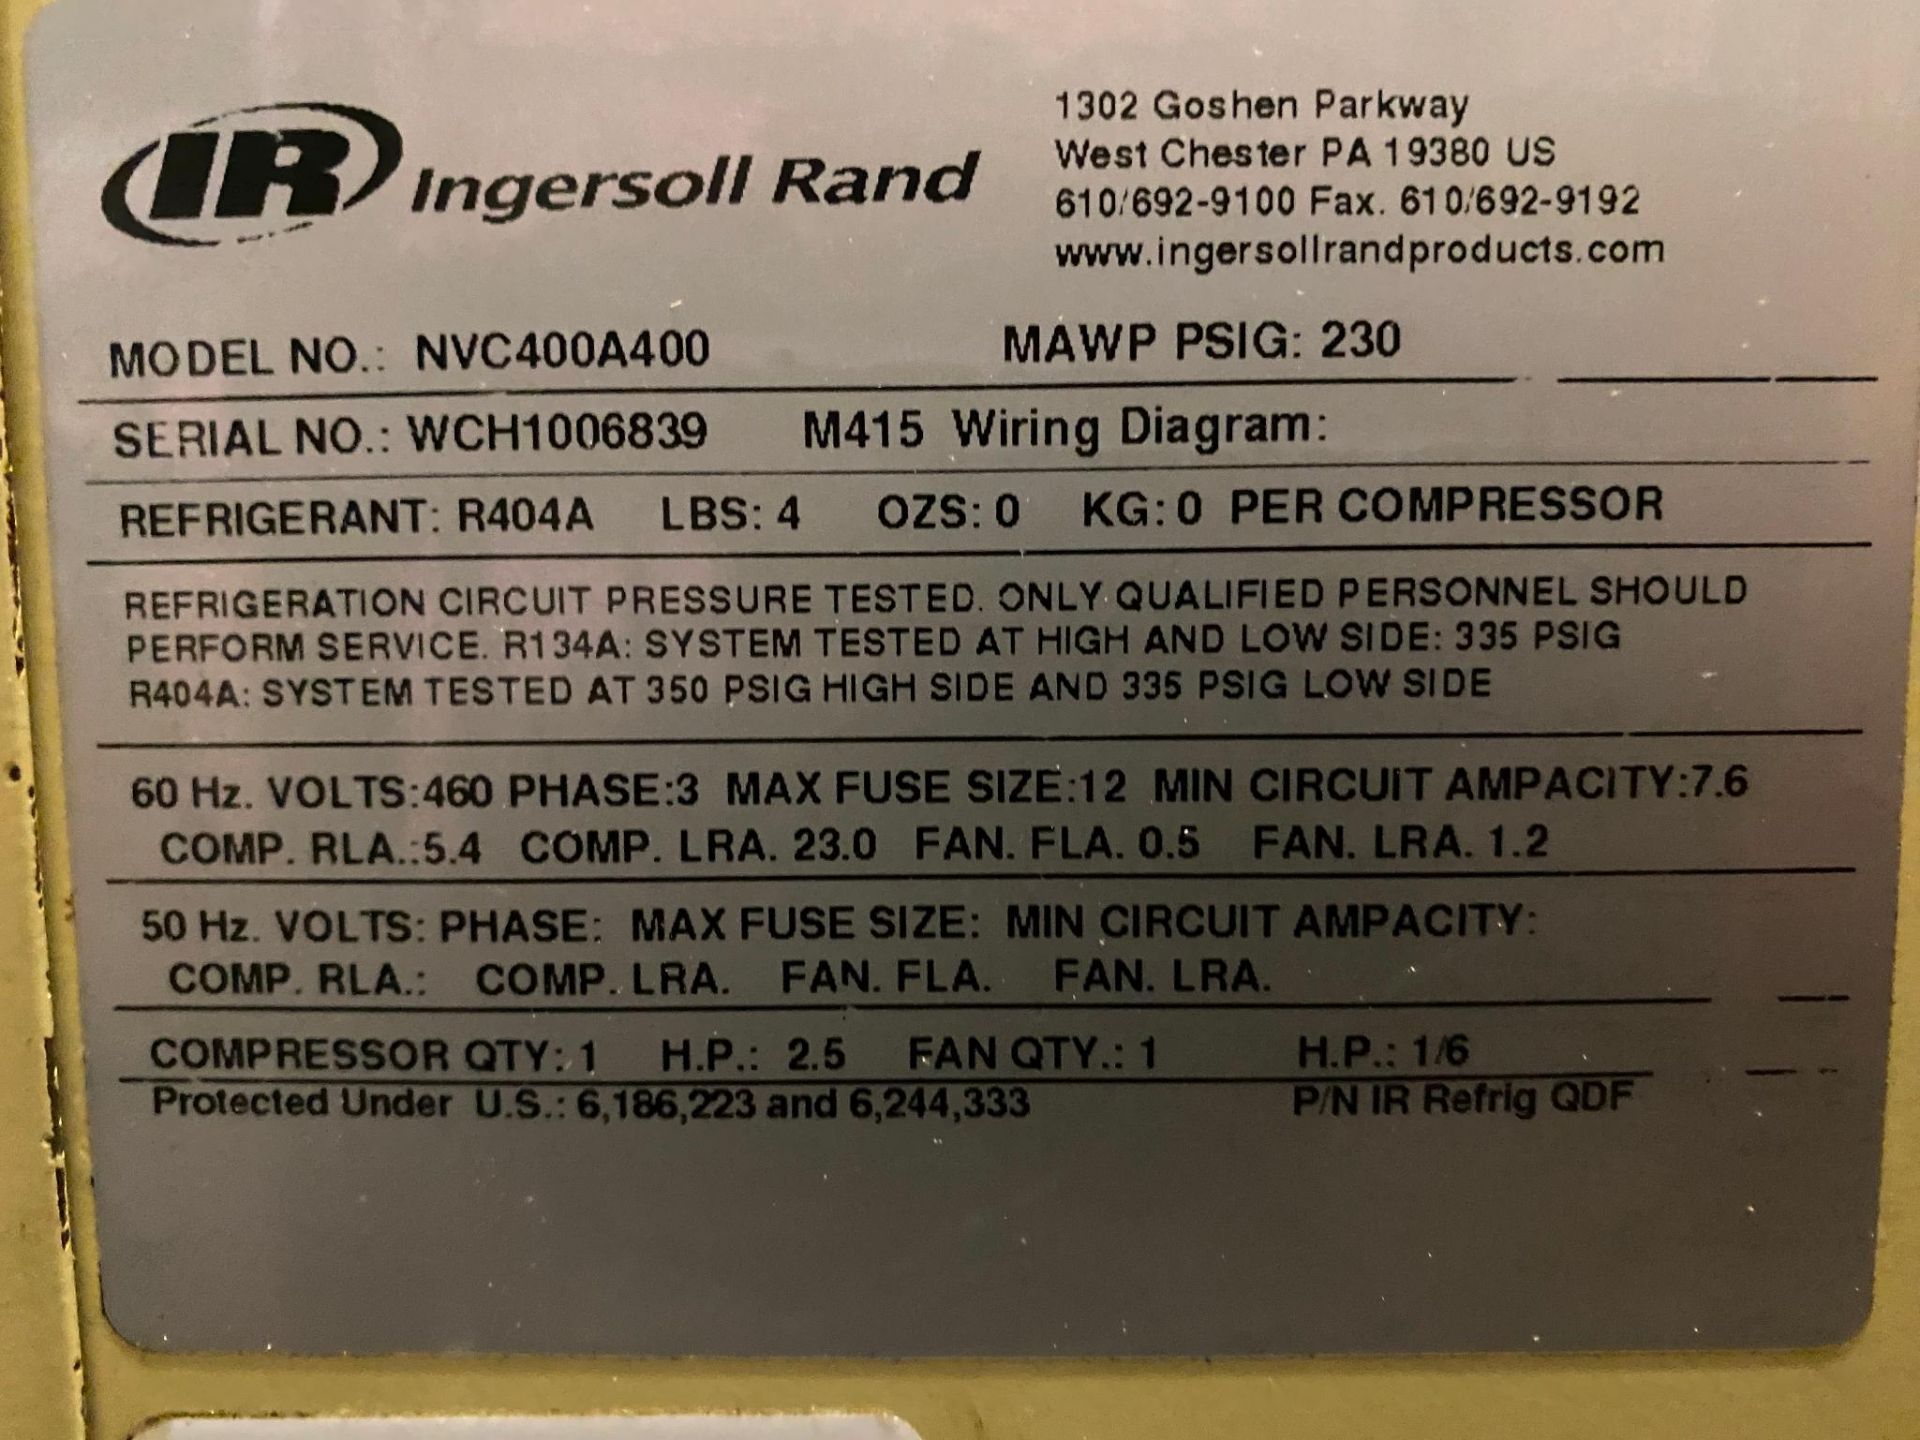 AIR DRYER, INGERSOLL-RAND MDL. NVC400A400, 460 v., 230 psi max. pressure, S/N WCH1006839 - Image 3 of 3